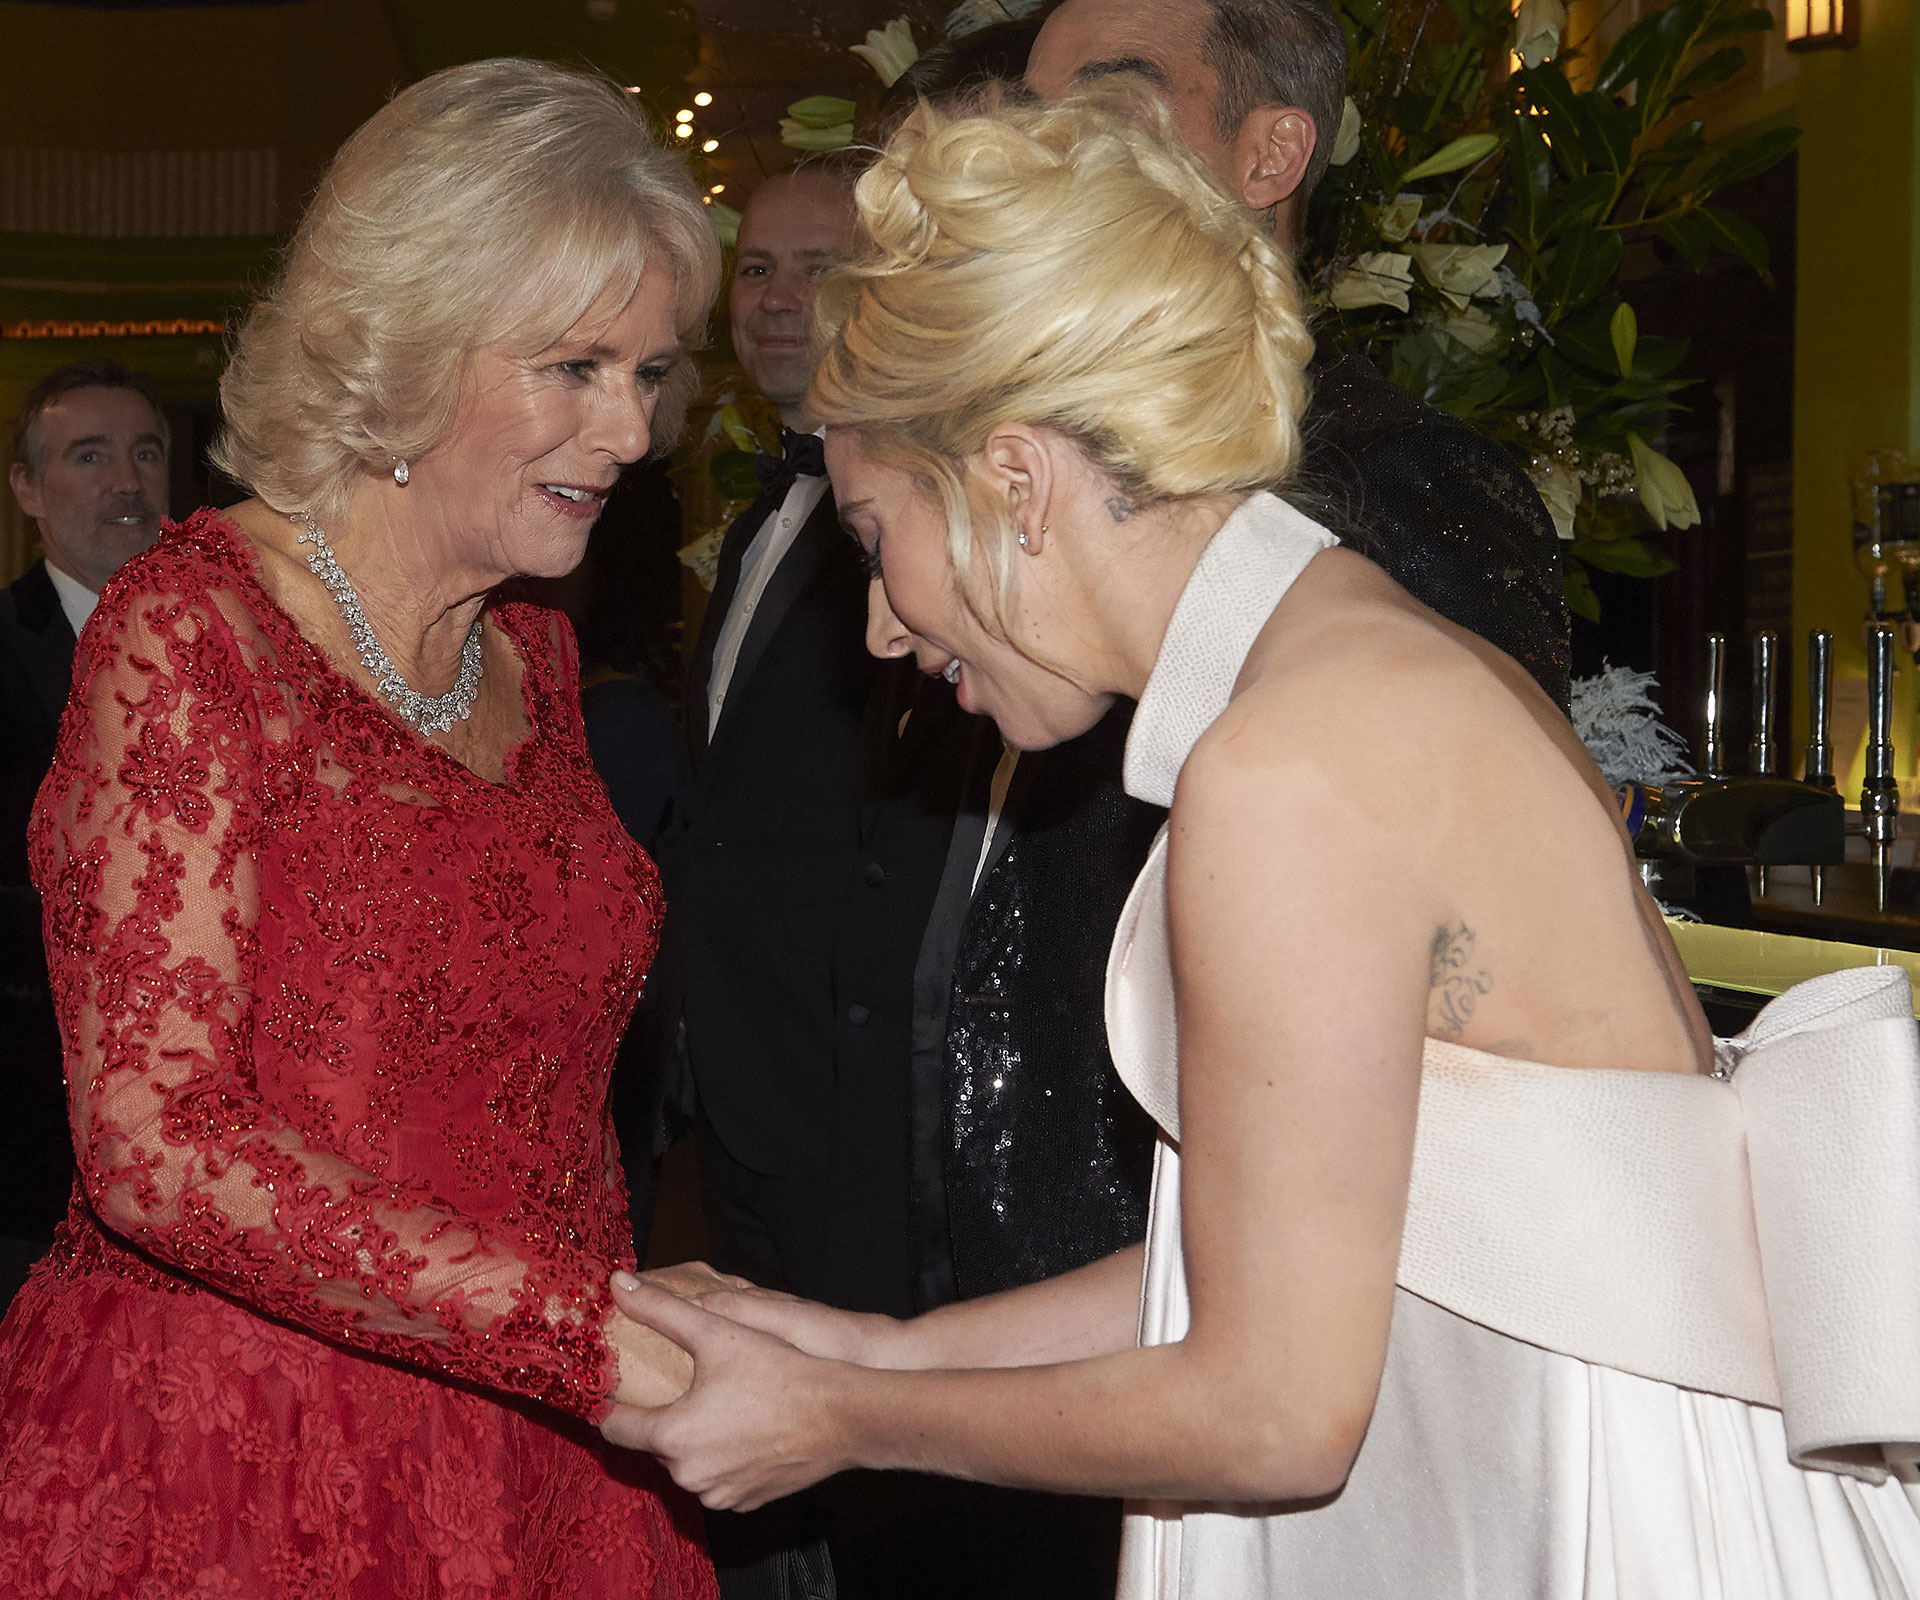 The Duchess of Cornwall met Lady Gaga and sweetly told her they share a nickname